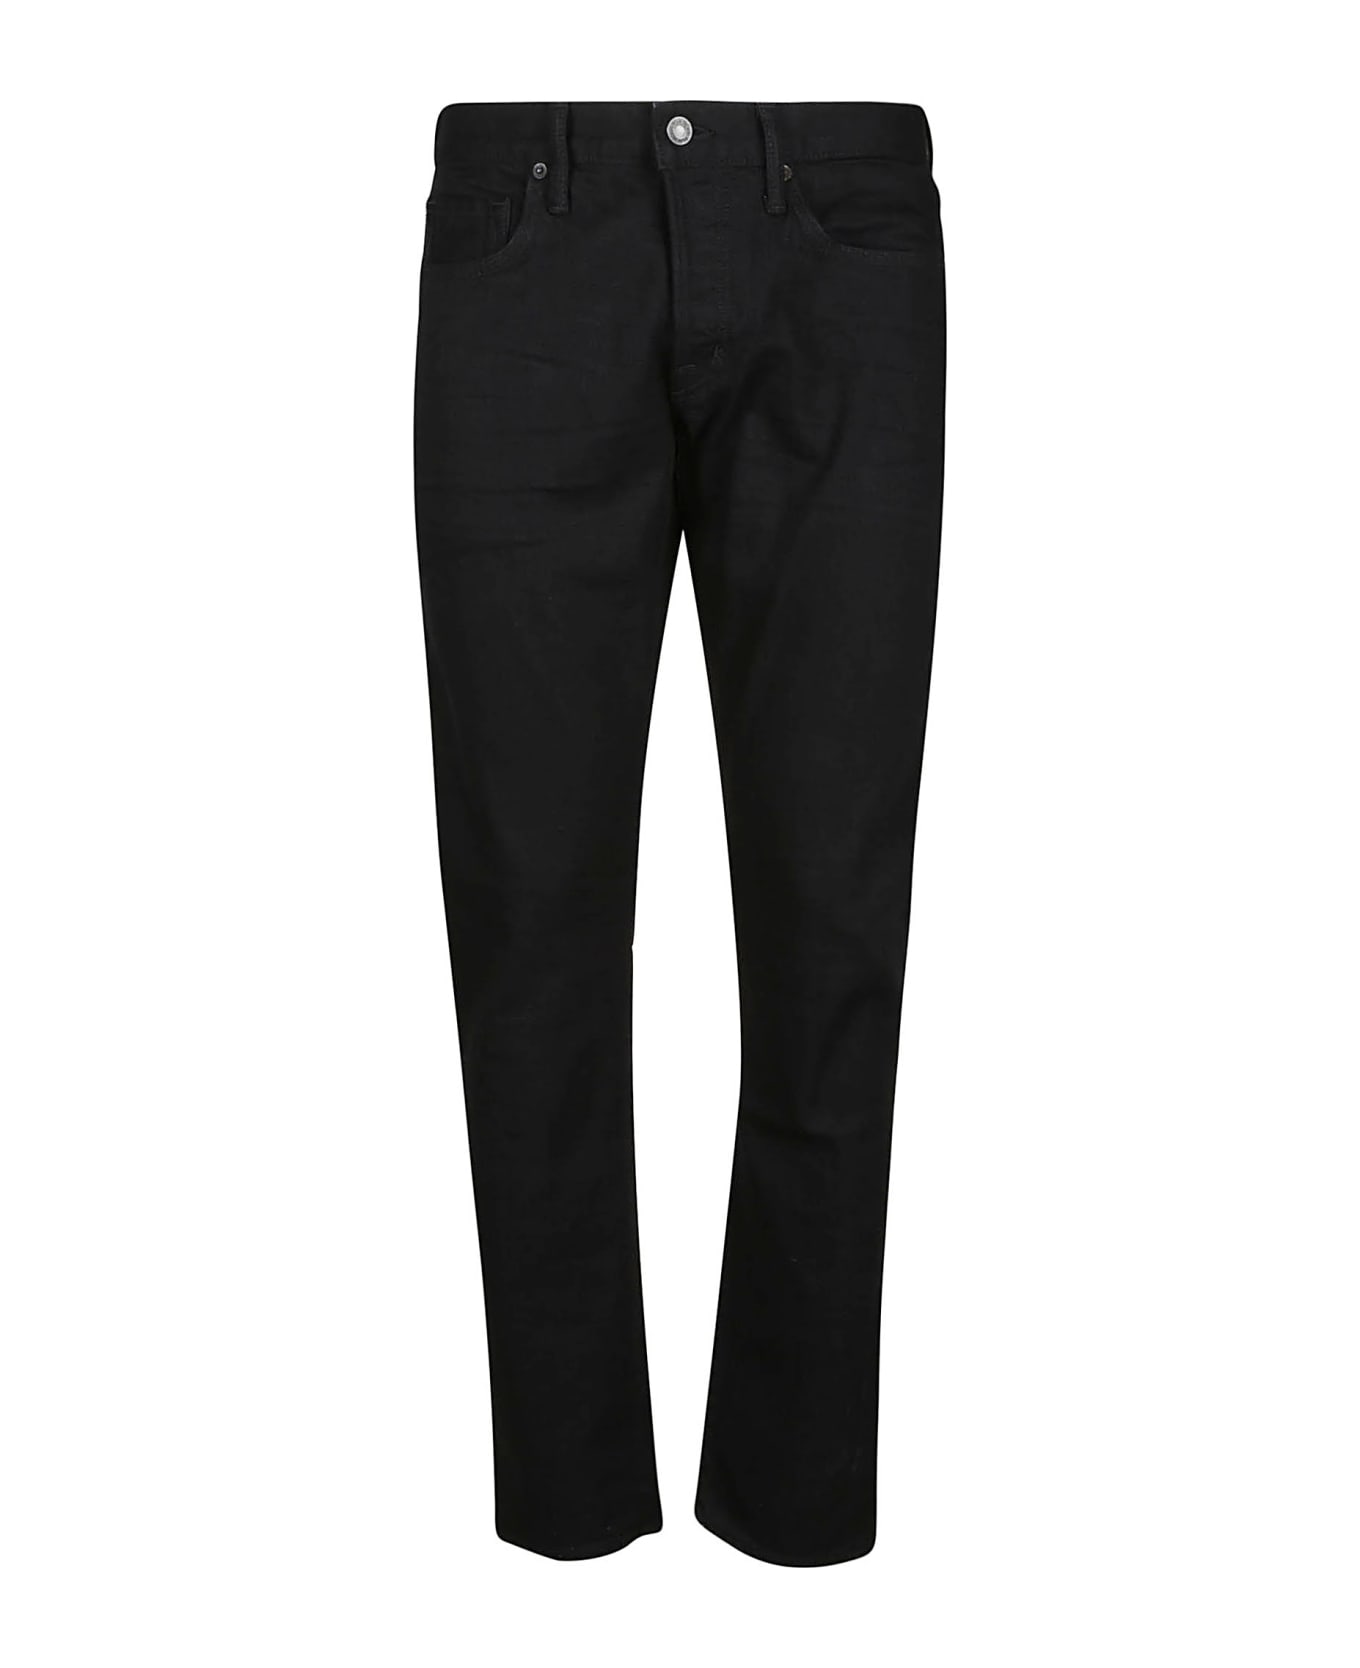 Tom Ford Slim Fit Jeans - Lead